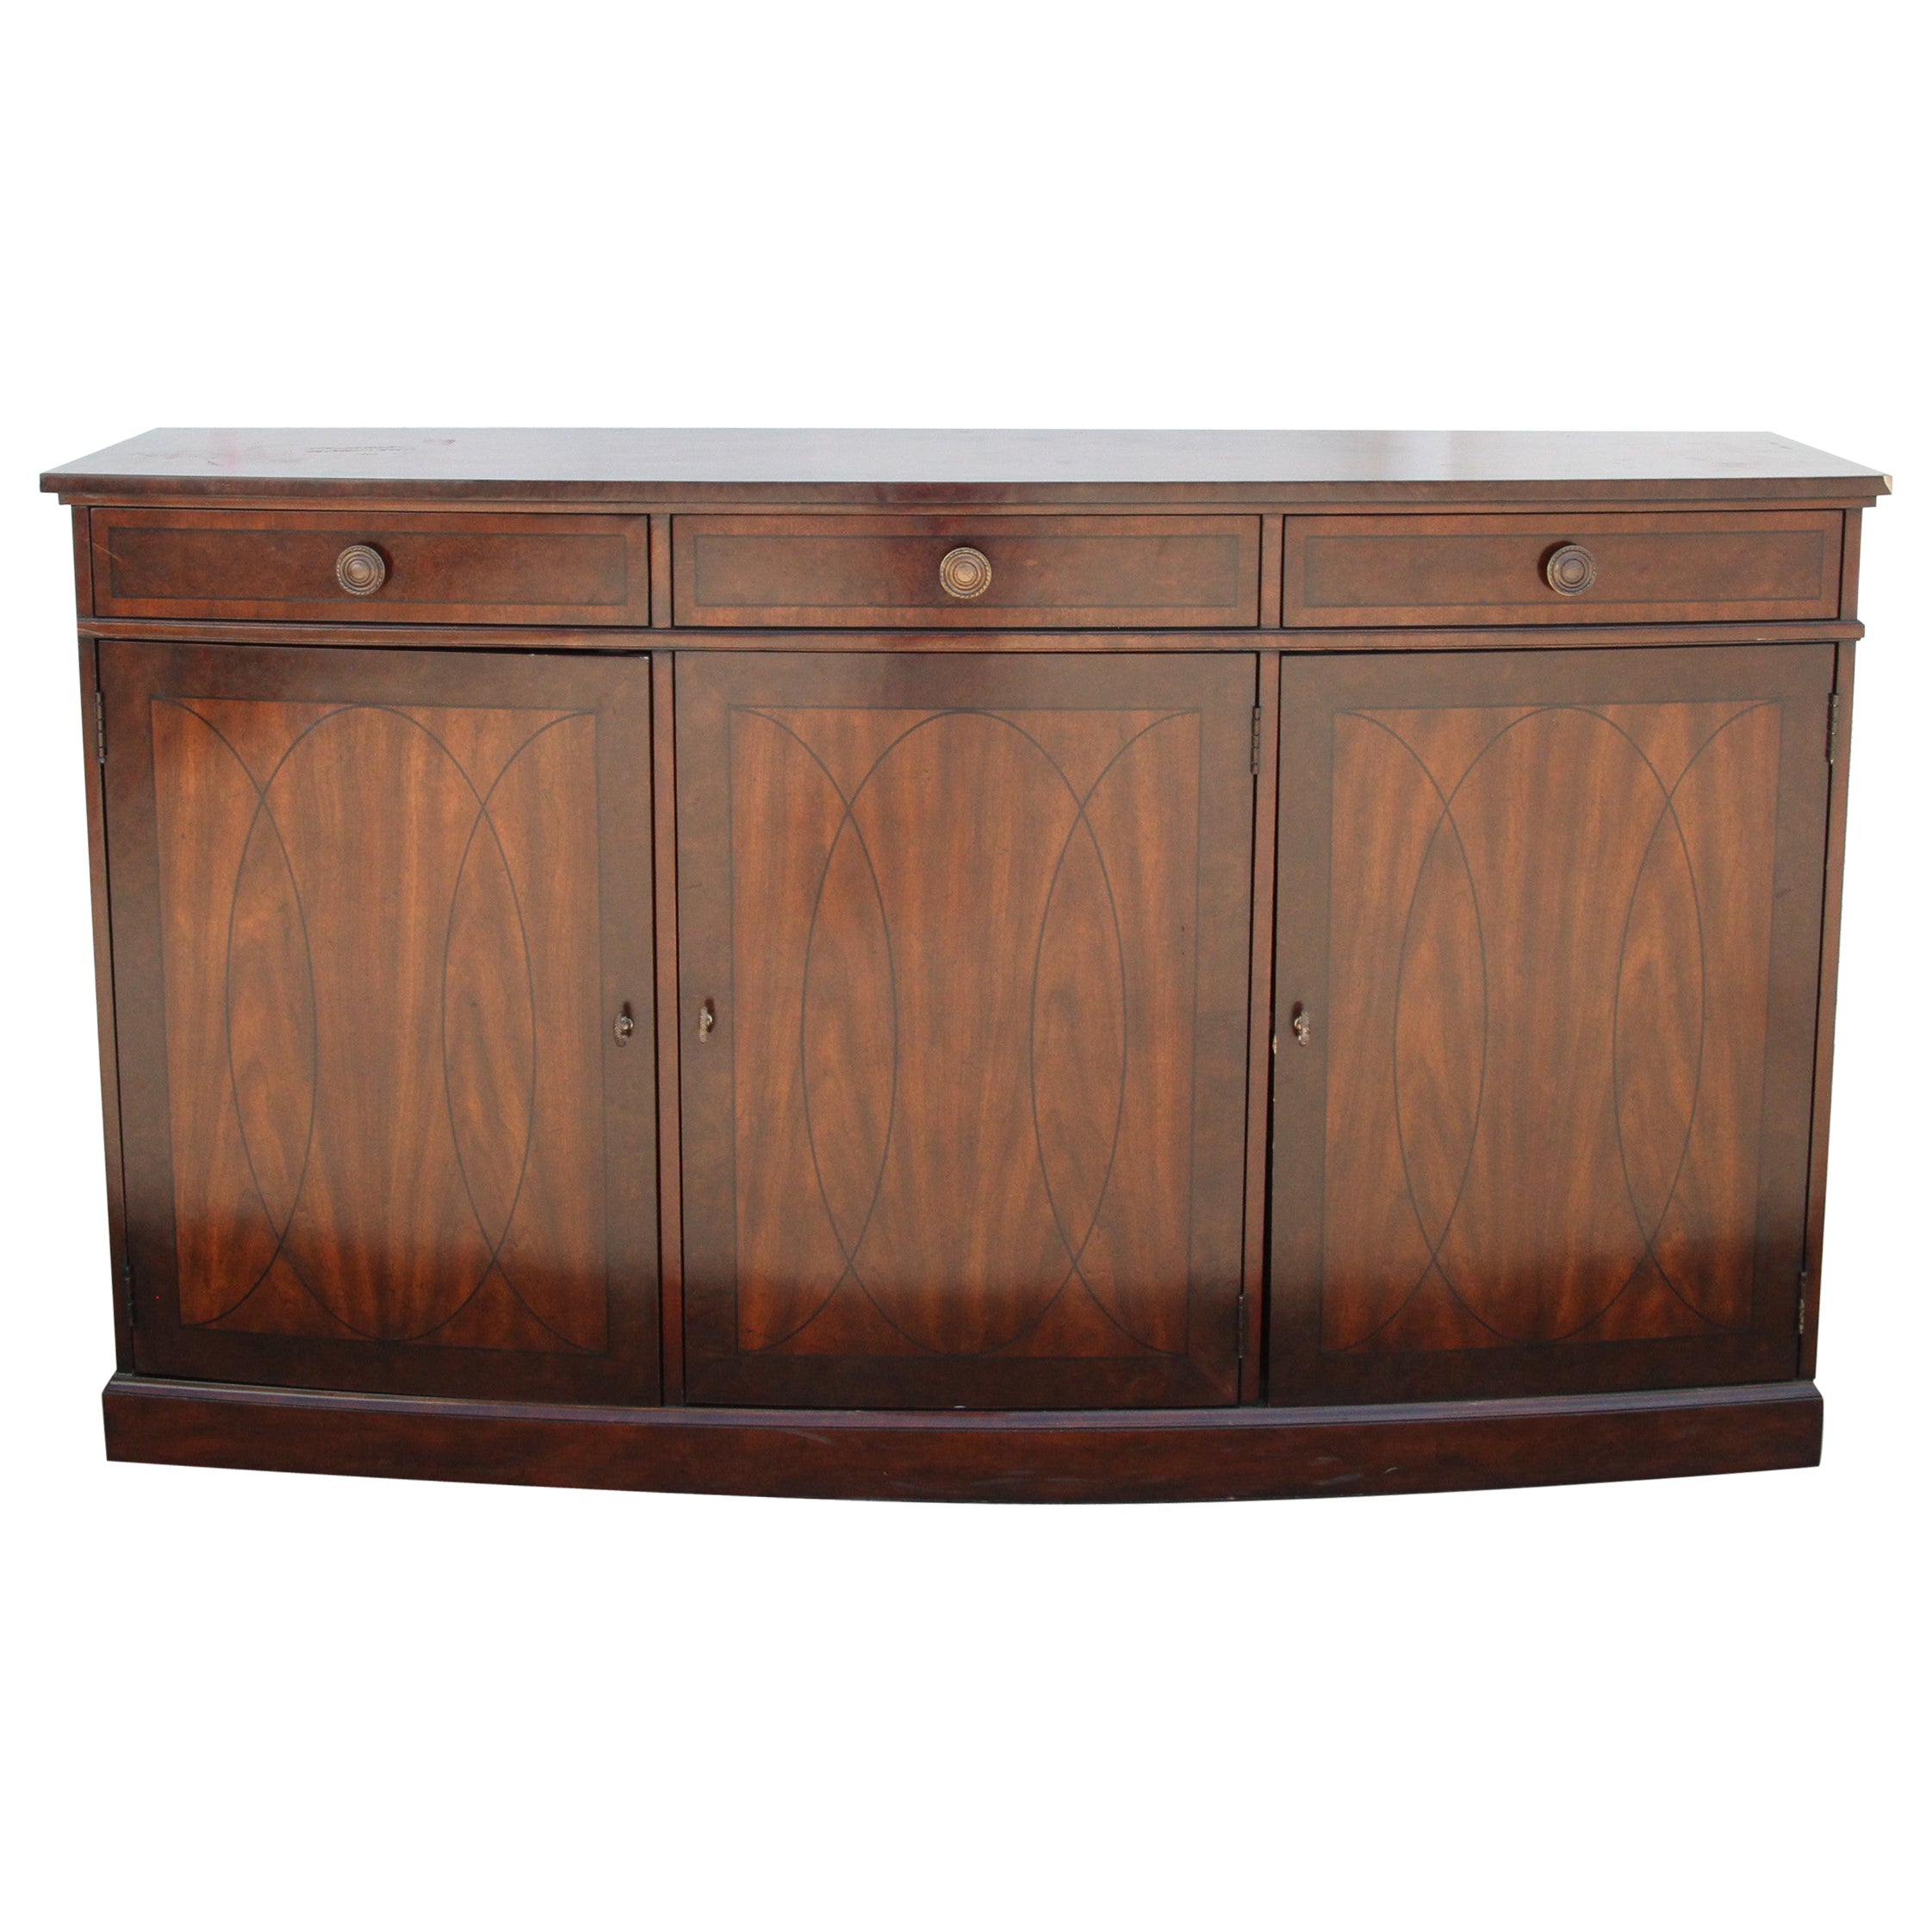 70" Modern Sideboard by Robb & Stucky For Sale